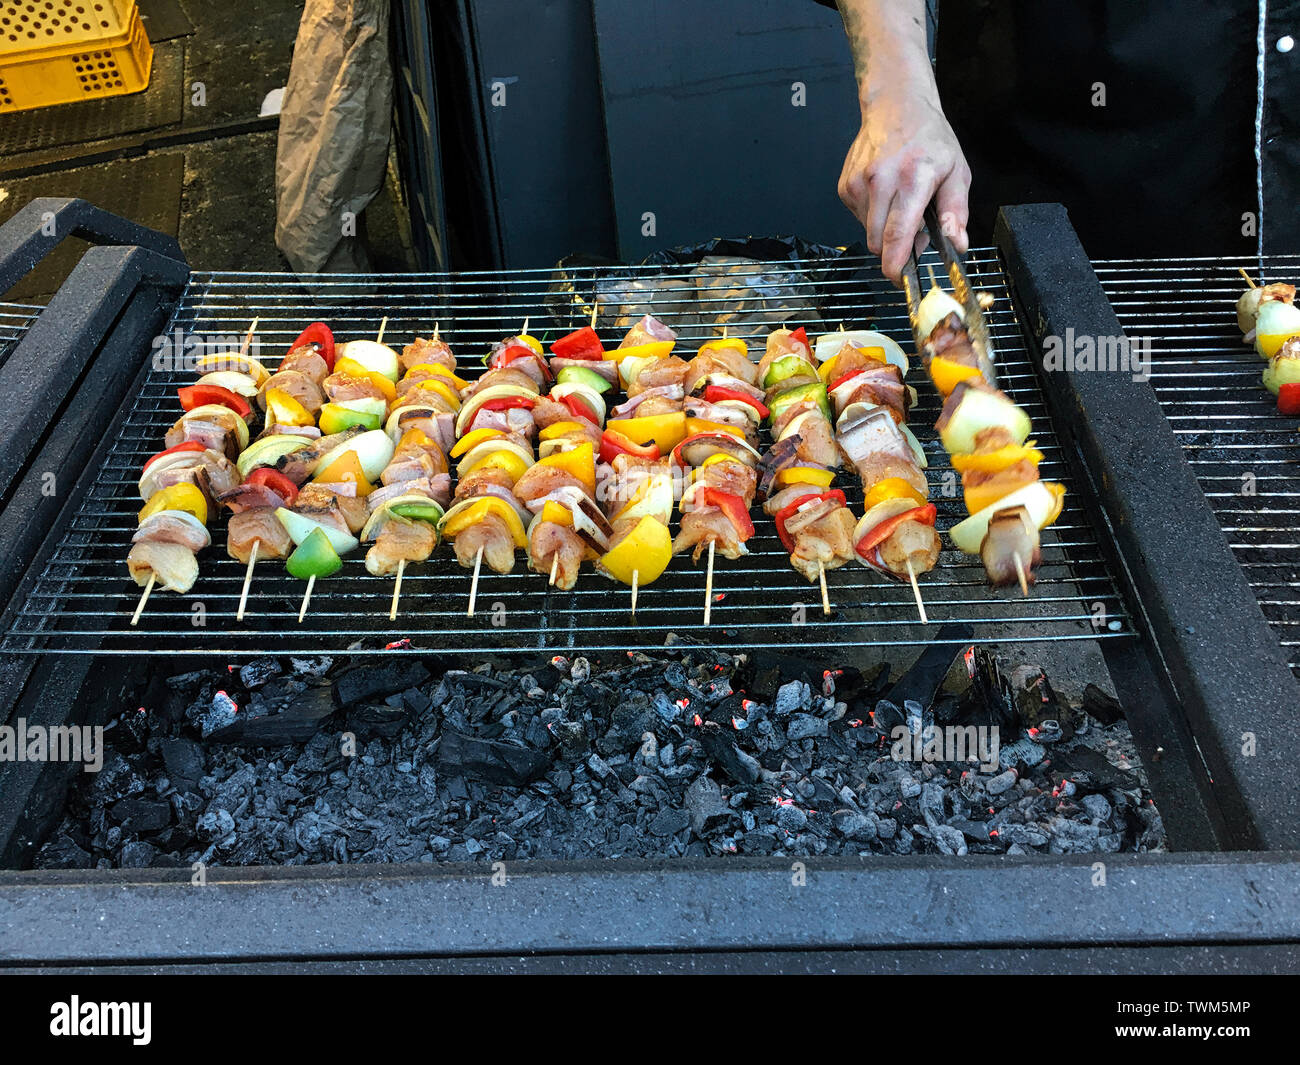 Cooking shish kabob on an outdoor grill in Old Town Square, Prague Czech Republic Stock Photo